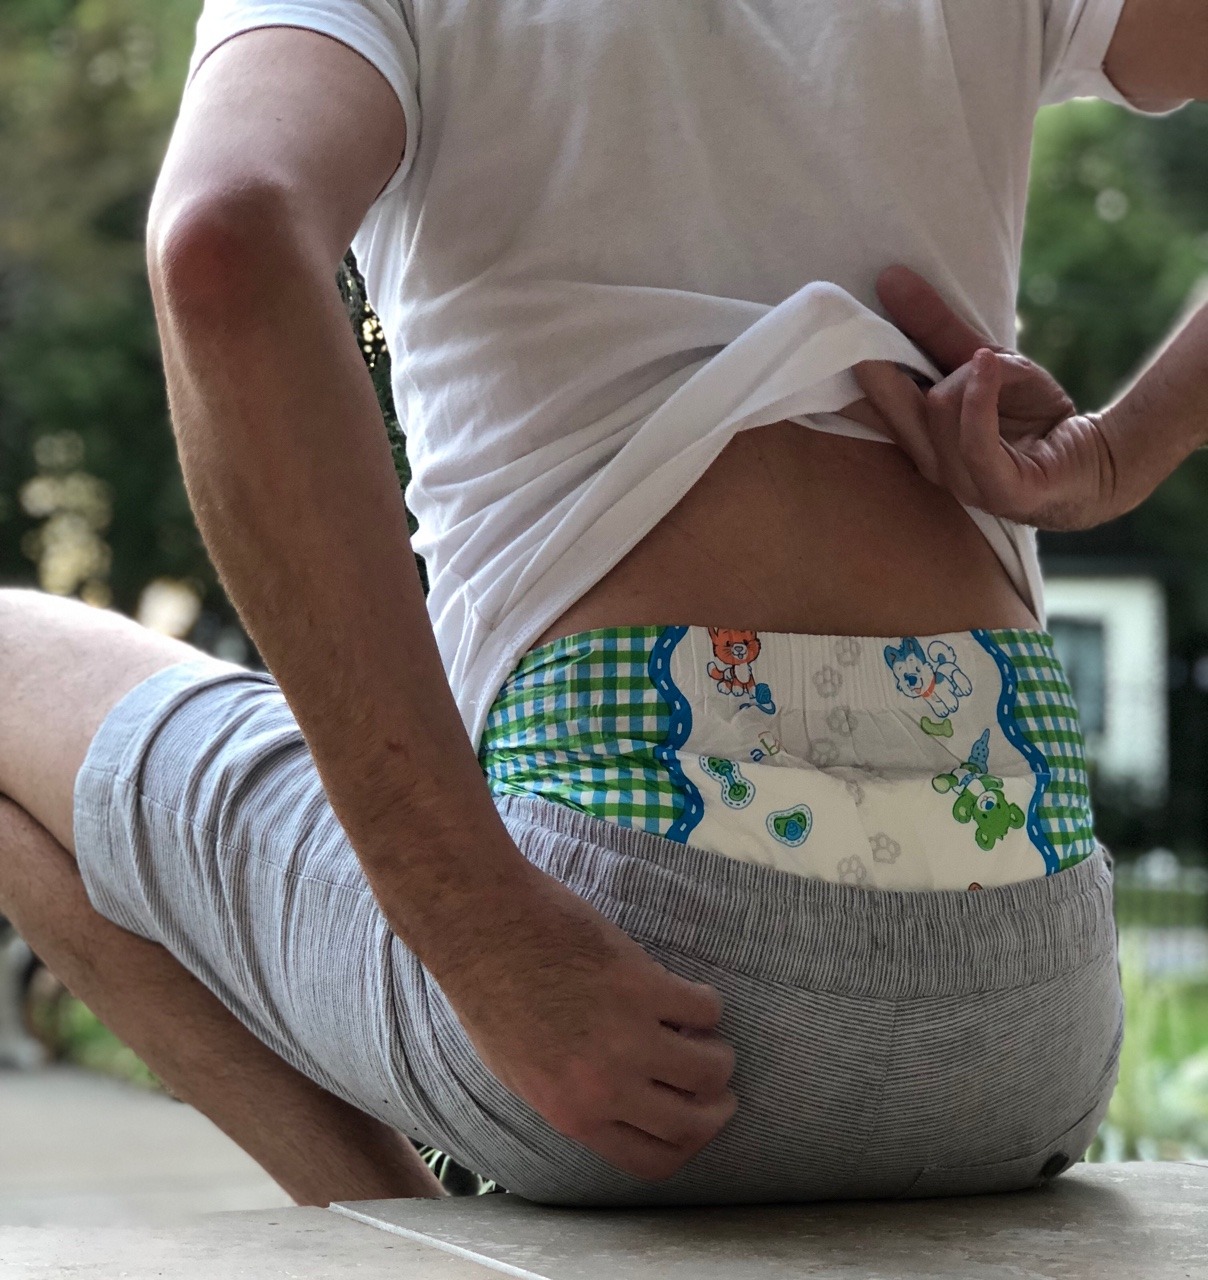 every day in diaper — diaperdlittledude: Why do you wear diapers?